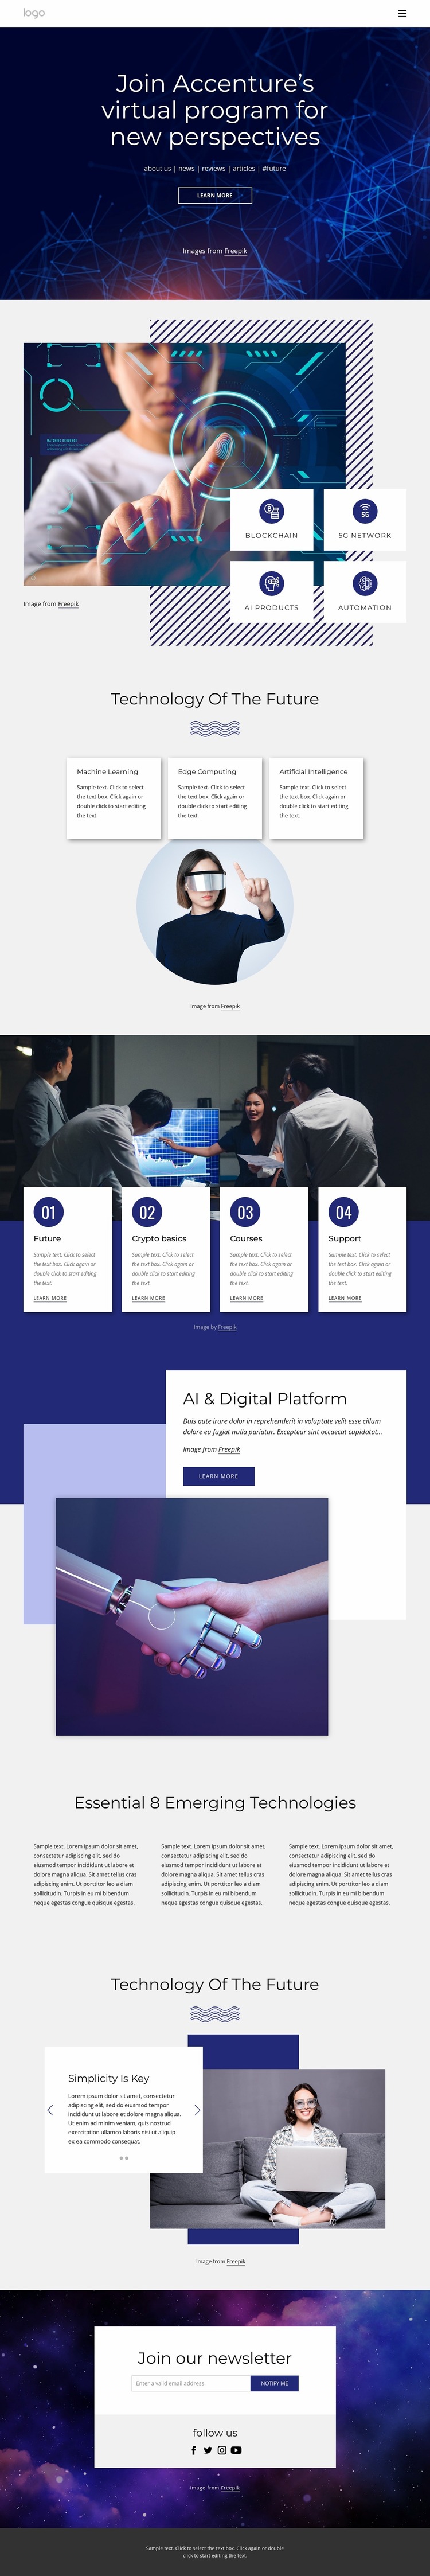 New technology perspectives Website Mockup